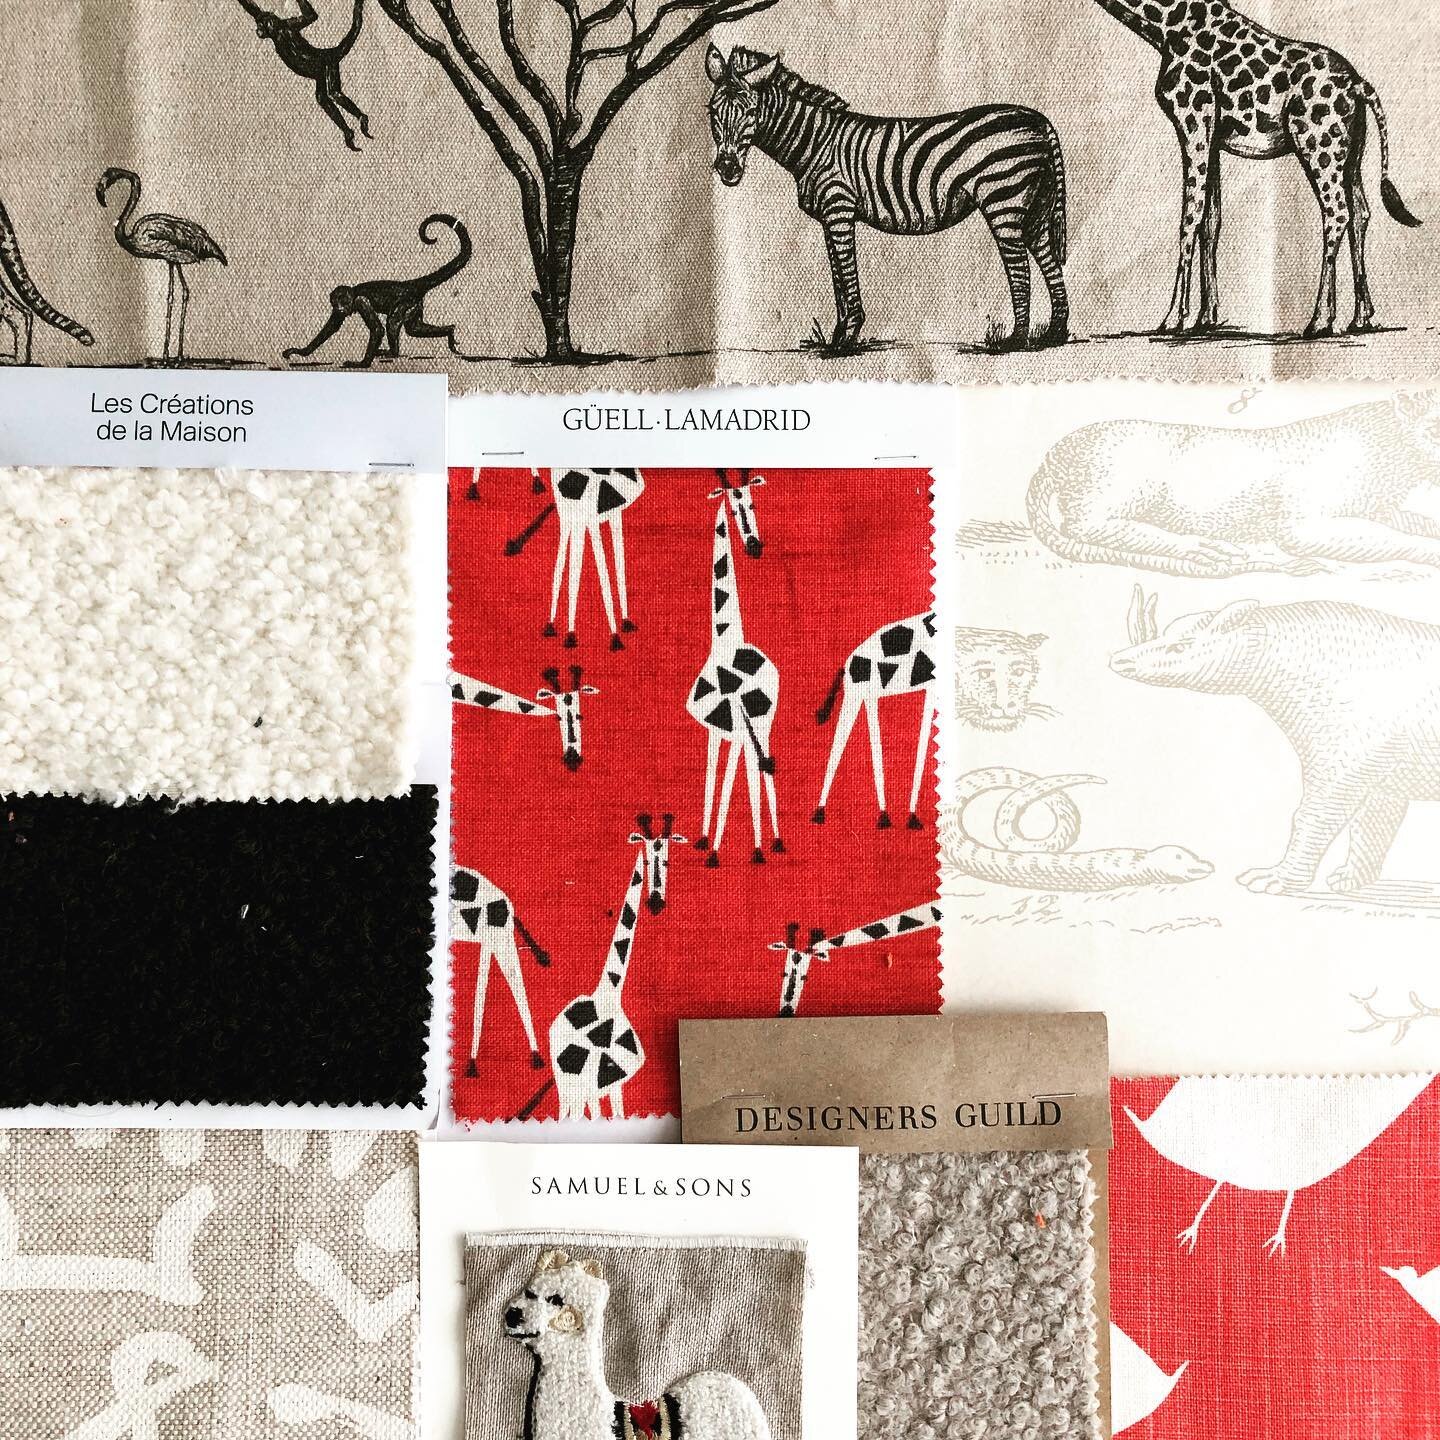 Having been sent the most wonderful collection of new animal prints we&rsquo;ve been busy hunting for more of nature&rsquo;s friends to inspire us on a Monday morning #animalprints #animalinteriors #interiordecor #naturesinspiration #newfabriccollect